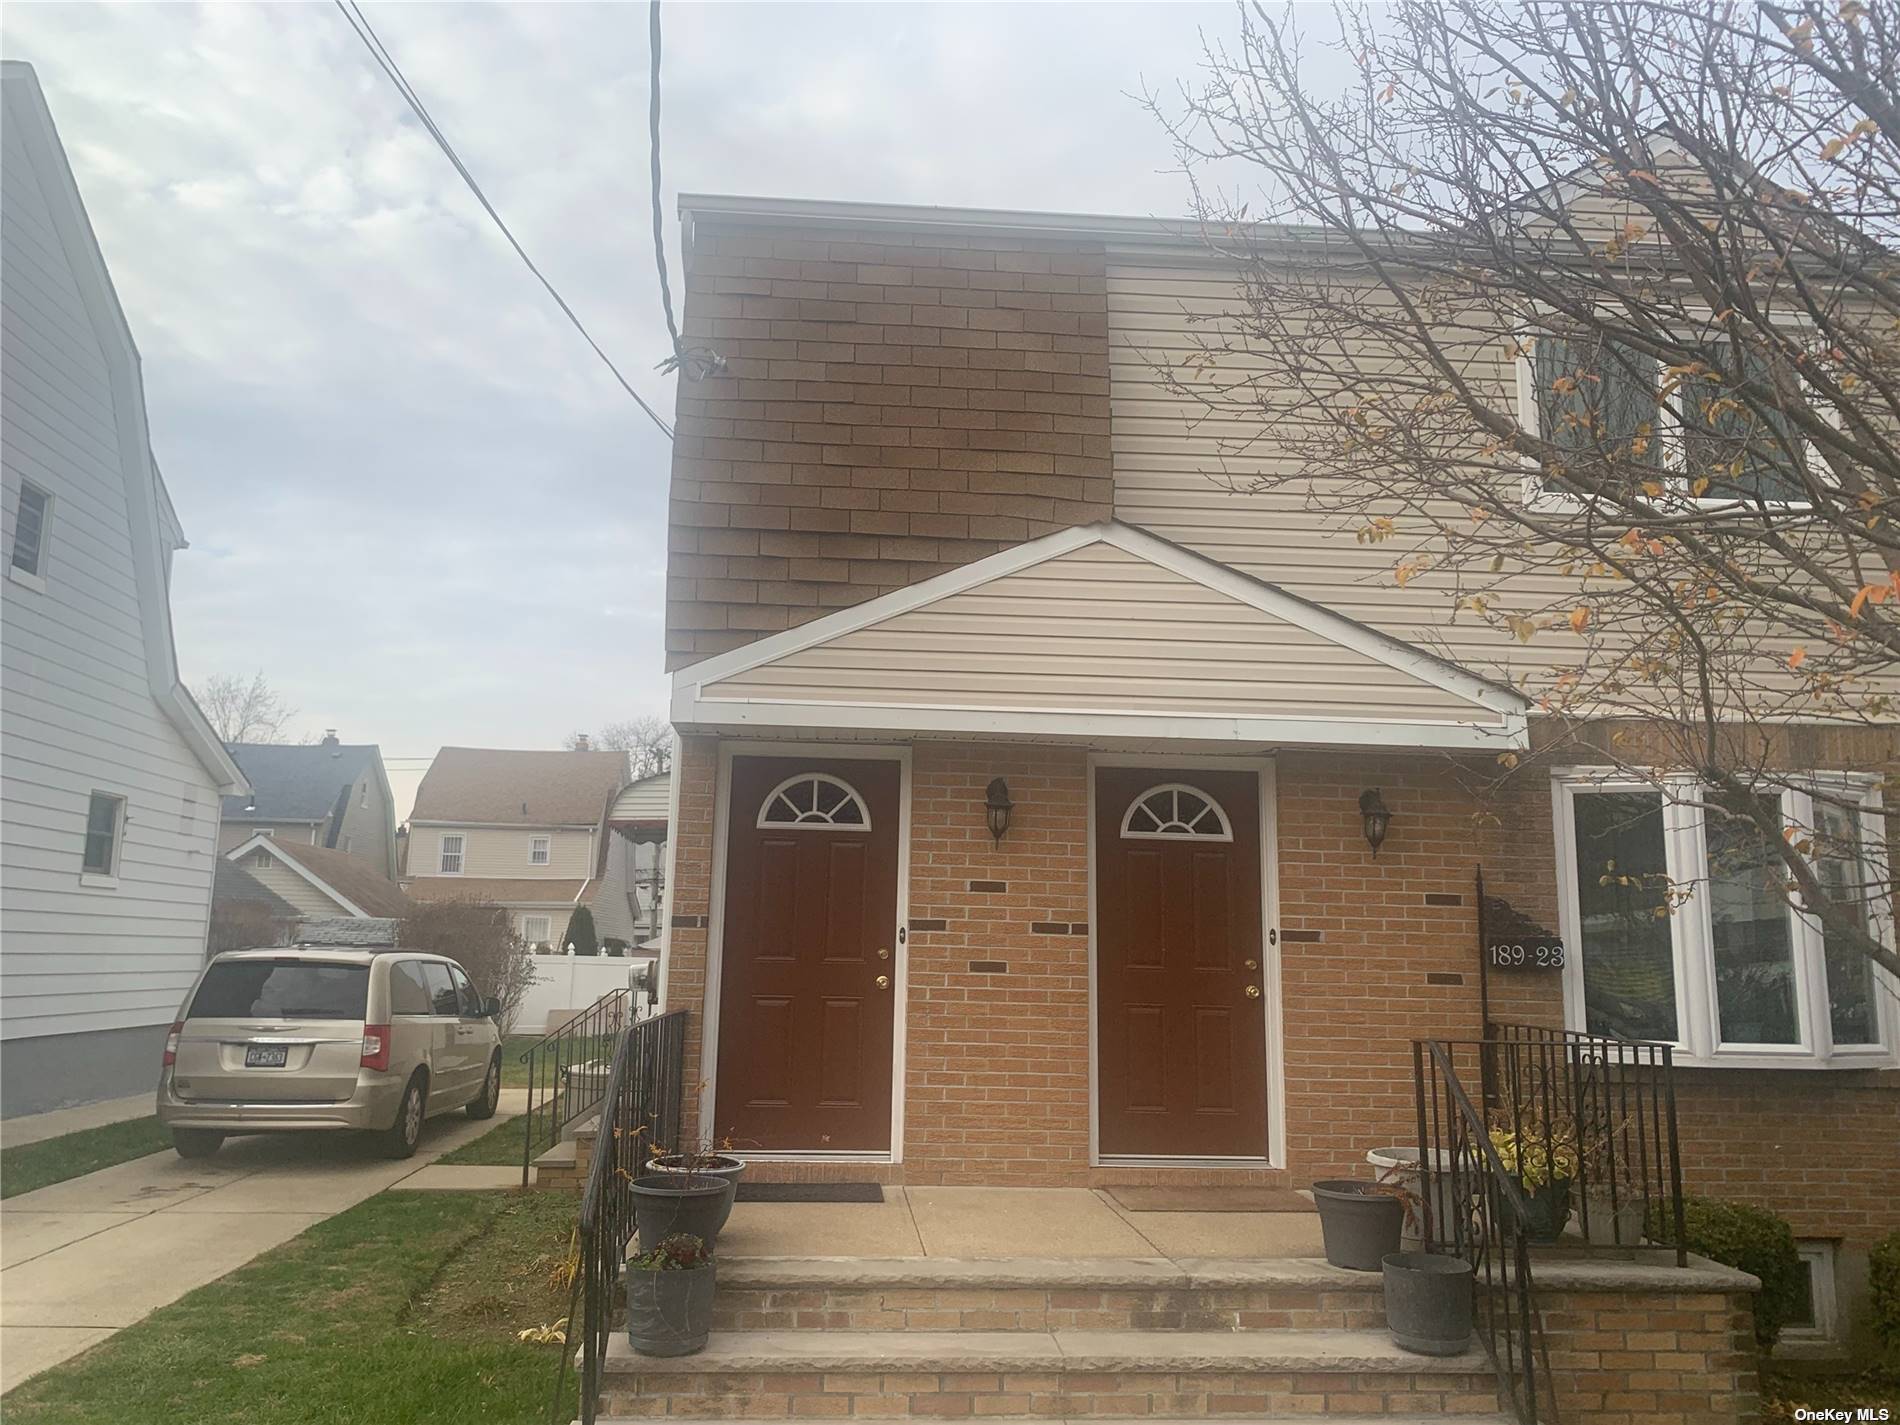 Listing in St. Albans, NY